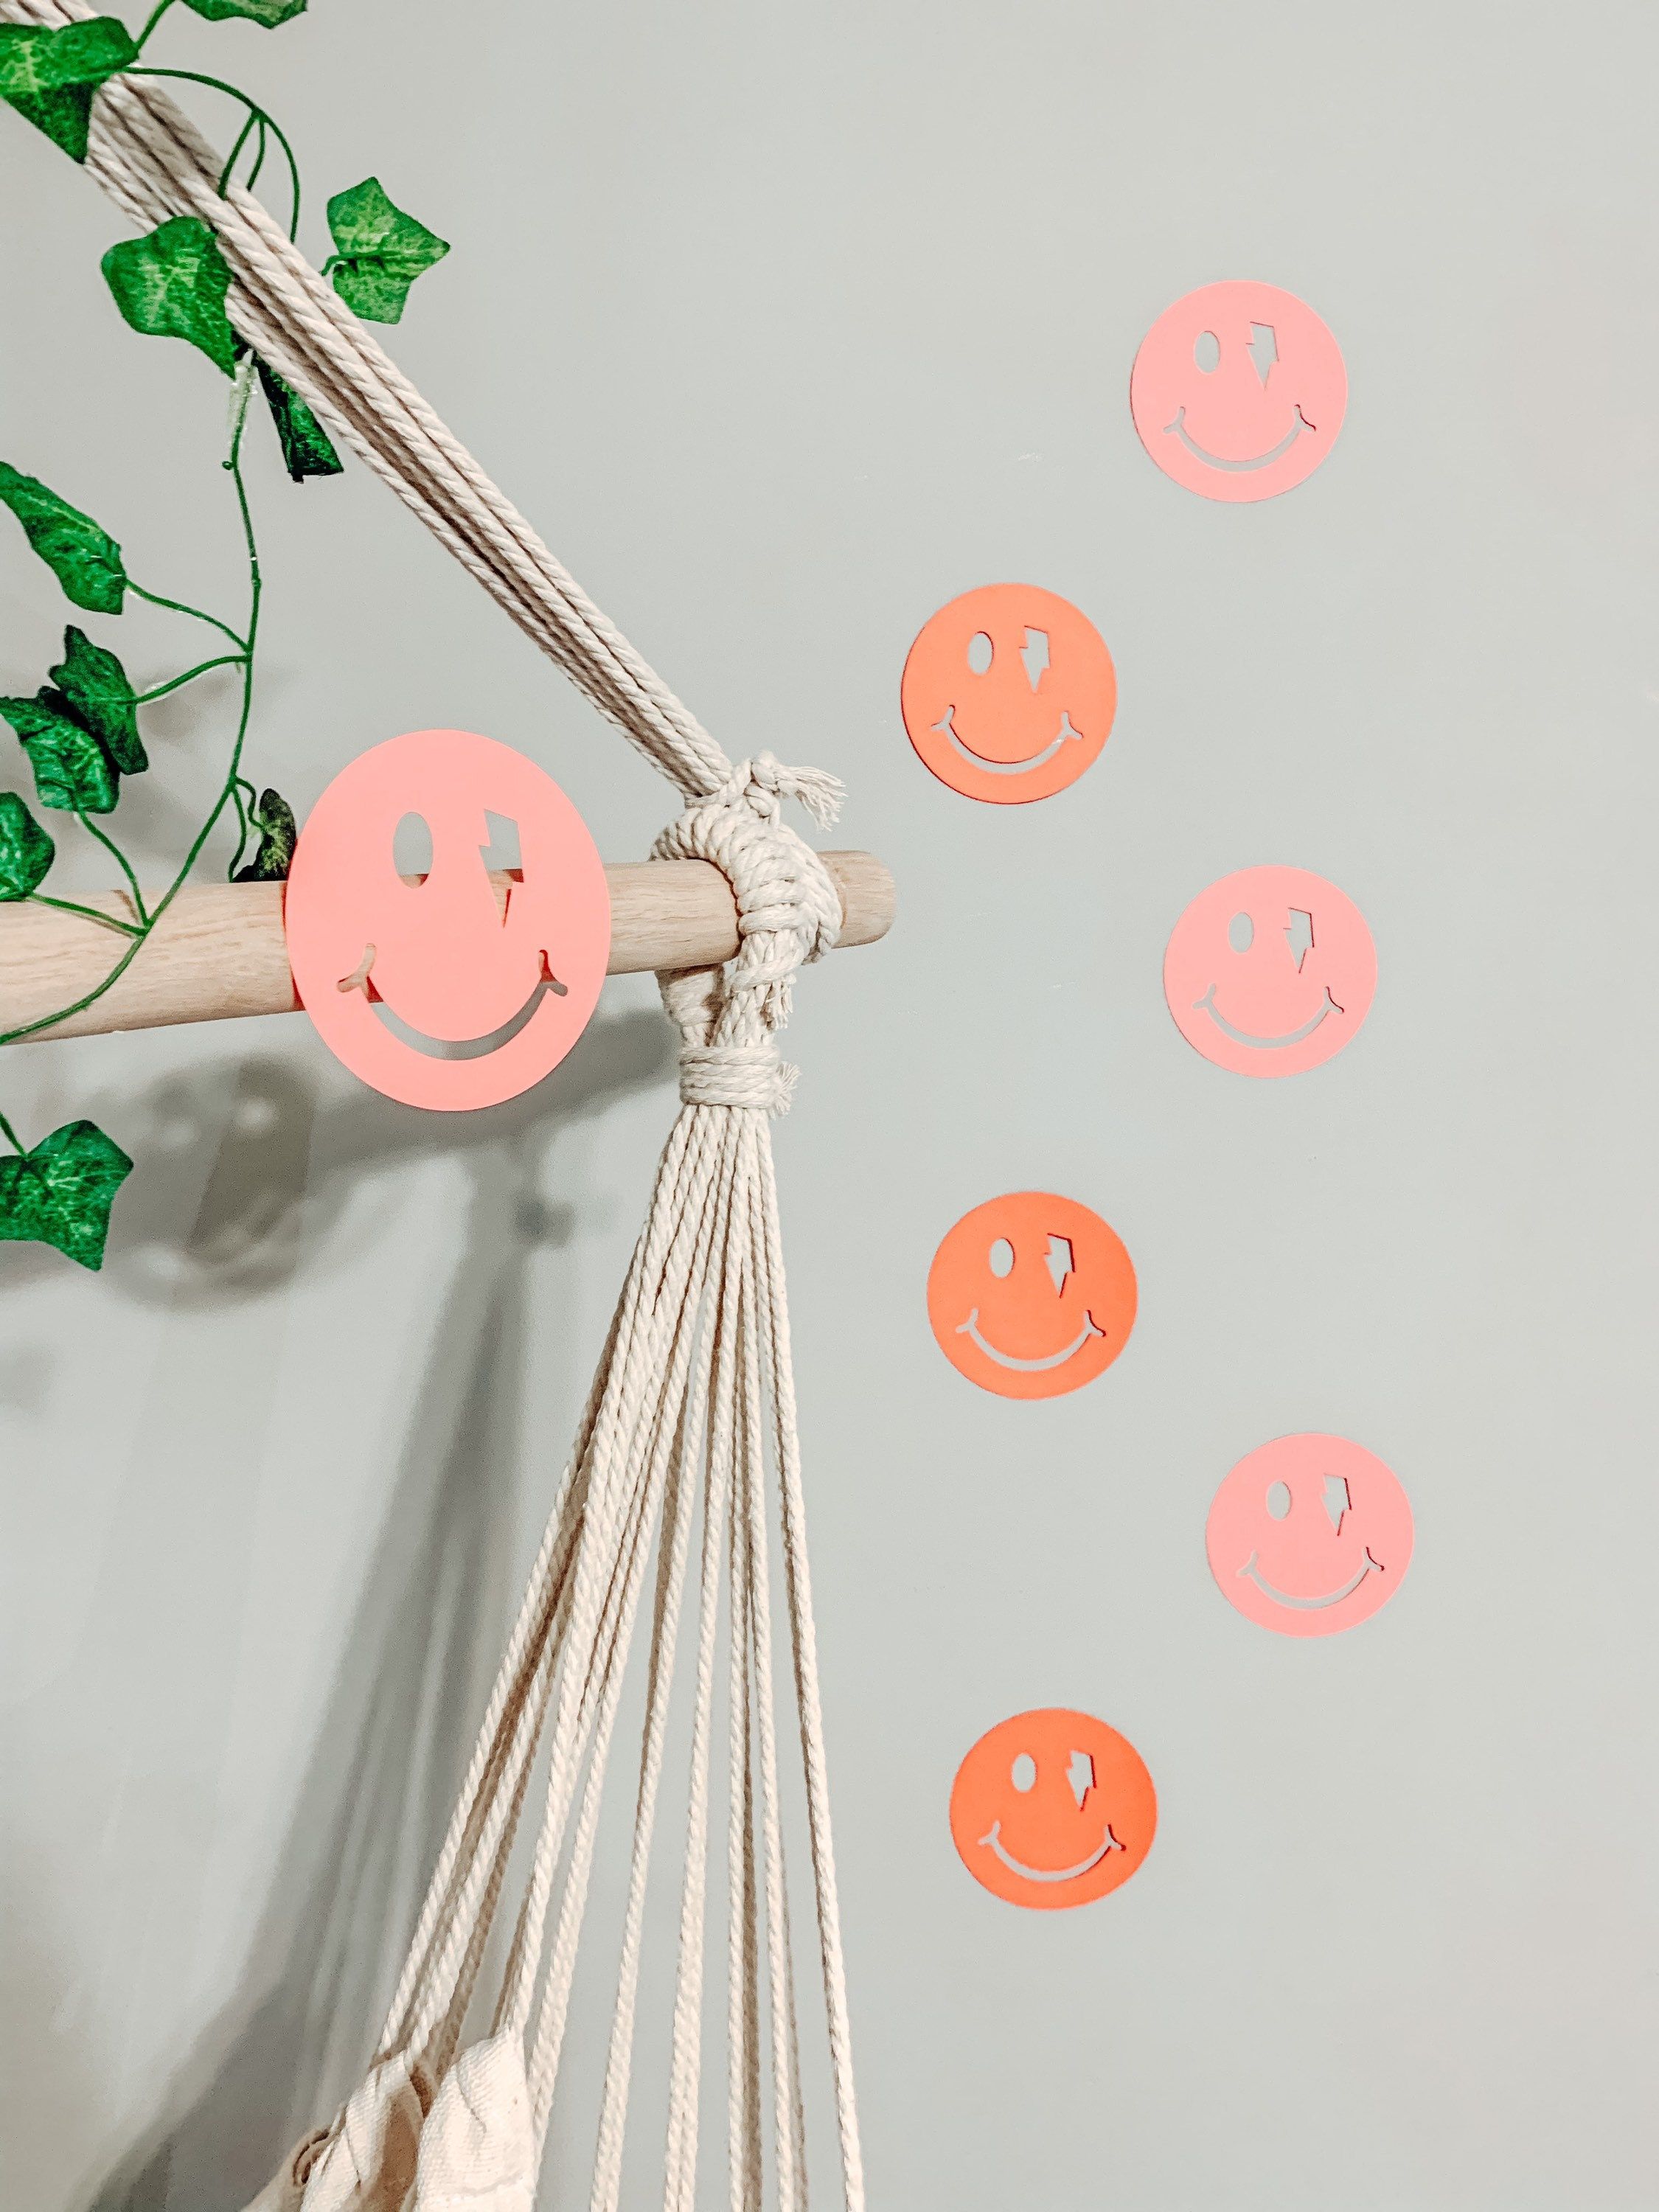 A hammock with smiley faces on it - Bright